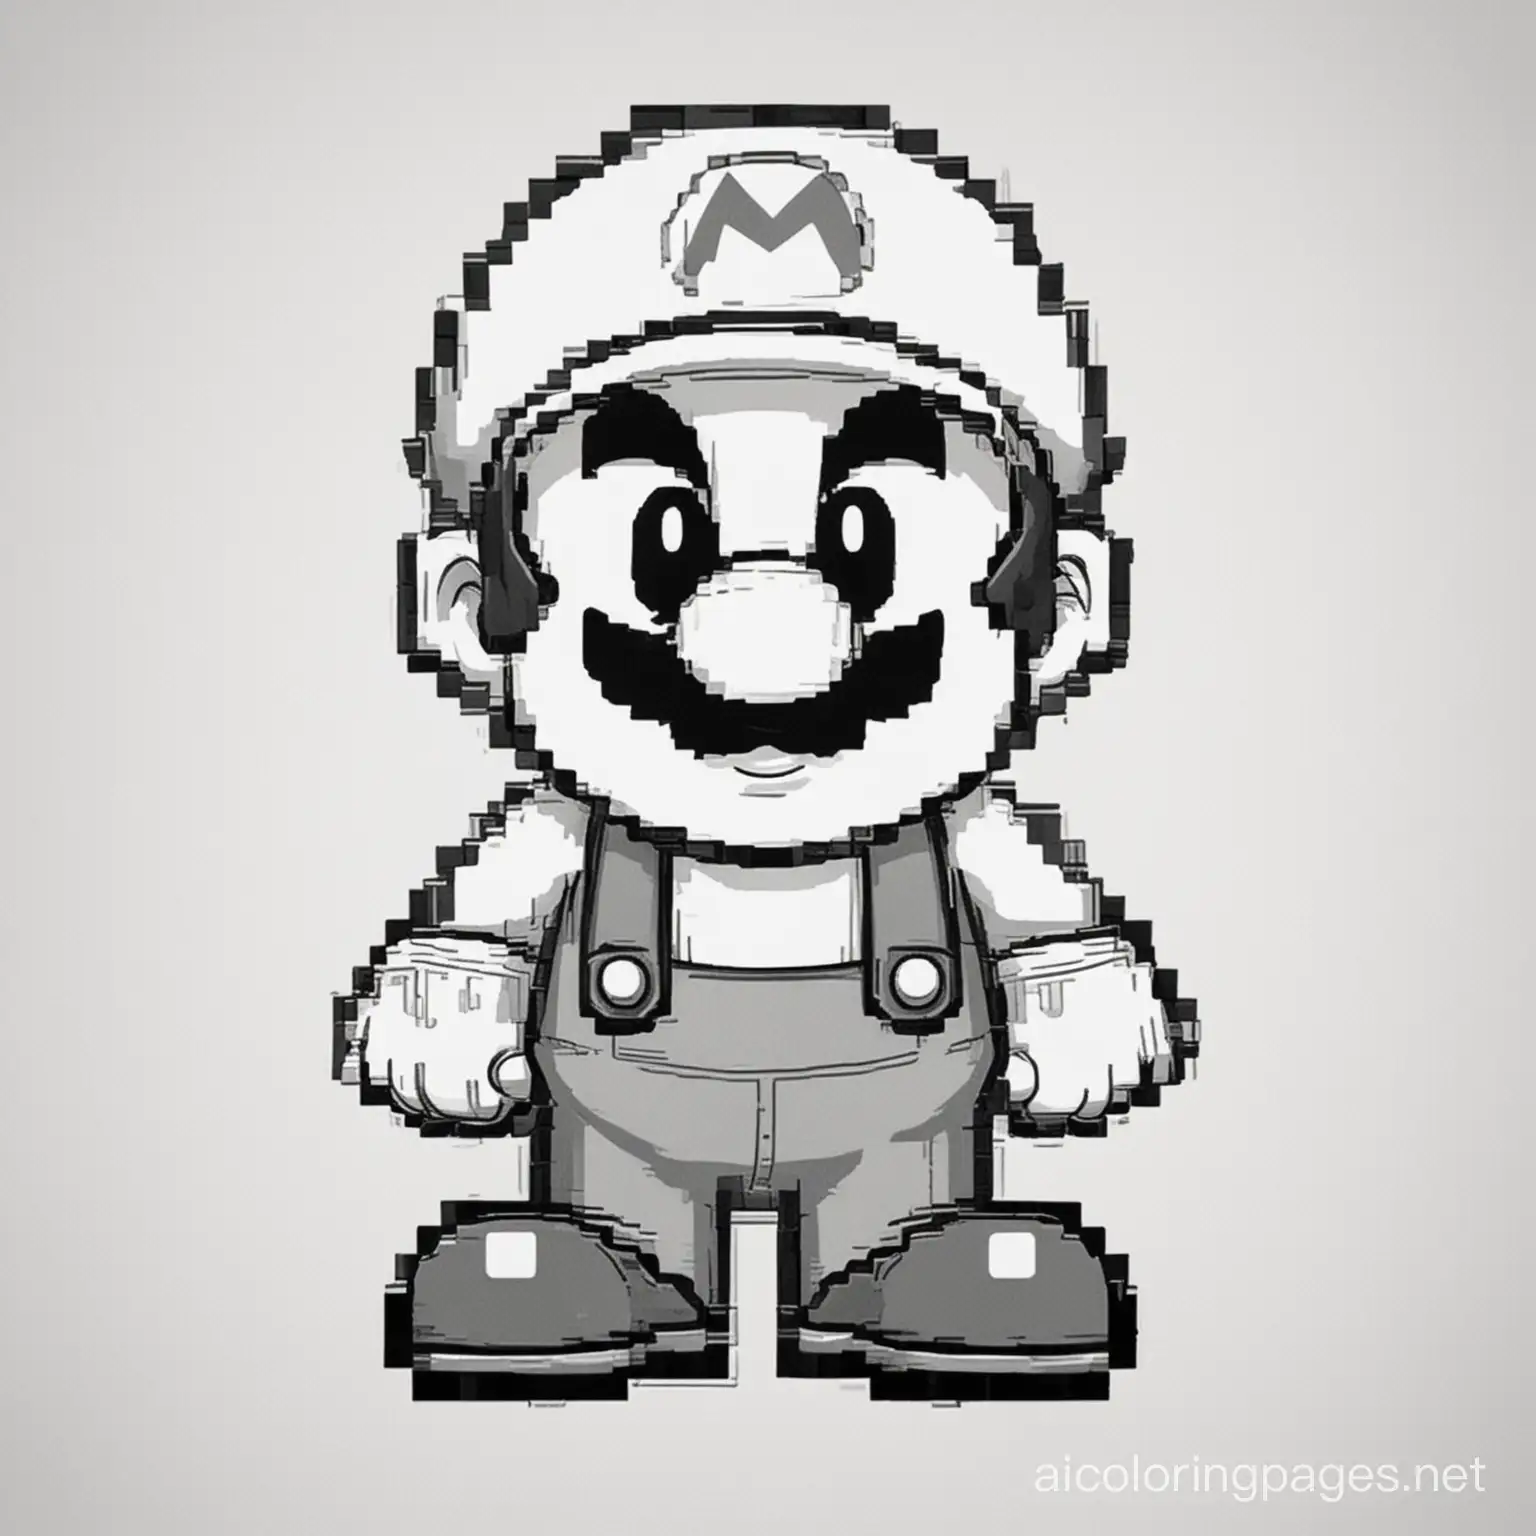 8Bit-Mario-Coloring-Page-with-Simplistic-Line-Art